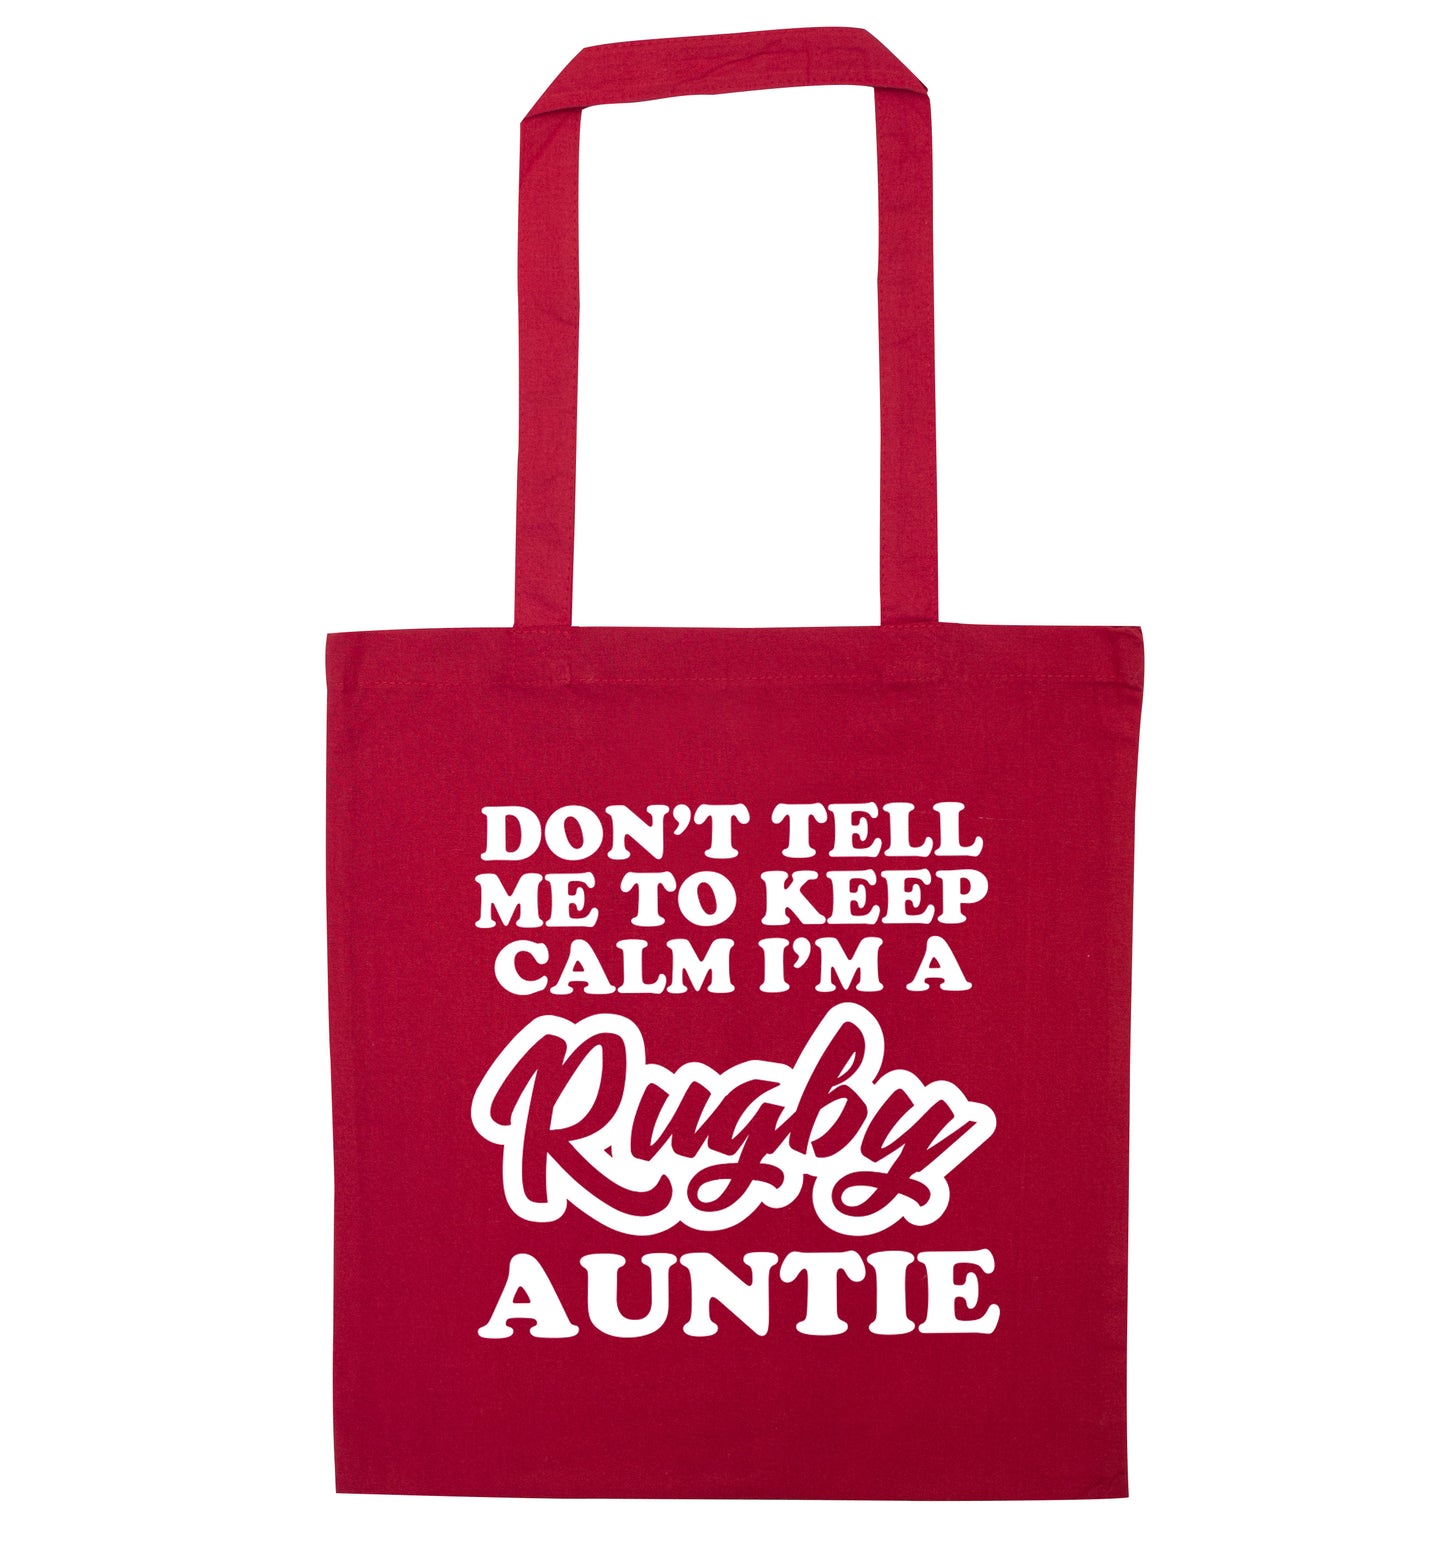 Don't tell me keep calm I'm a rugby auntie red tote bag